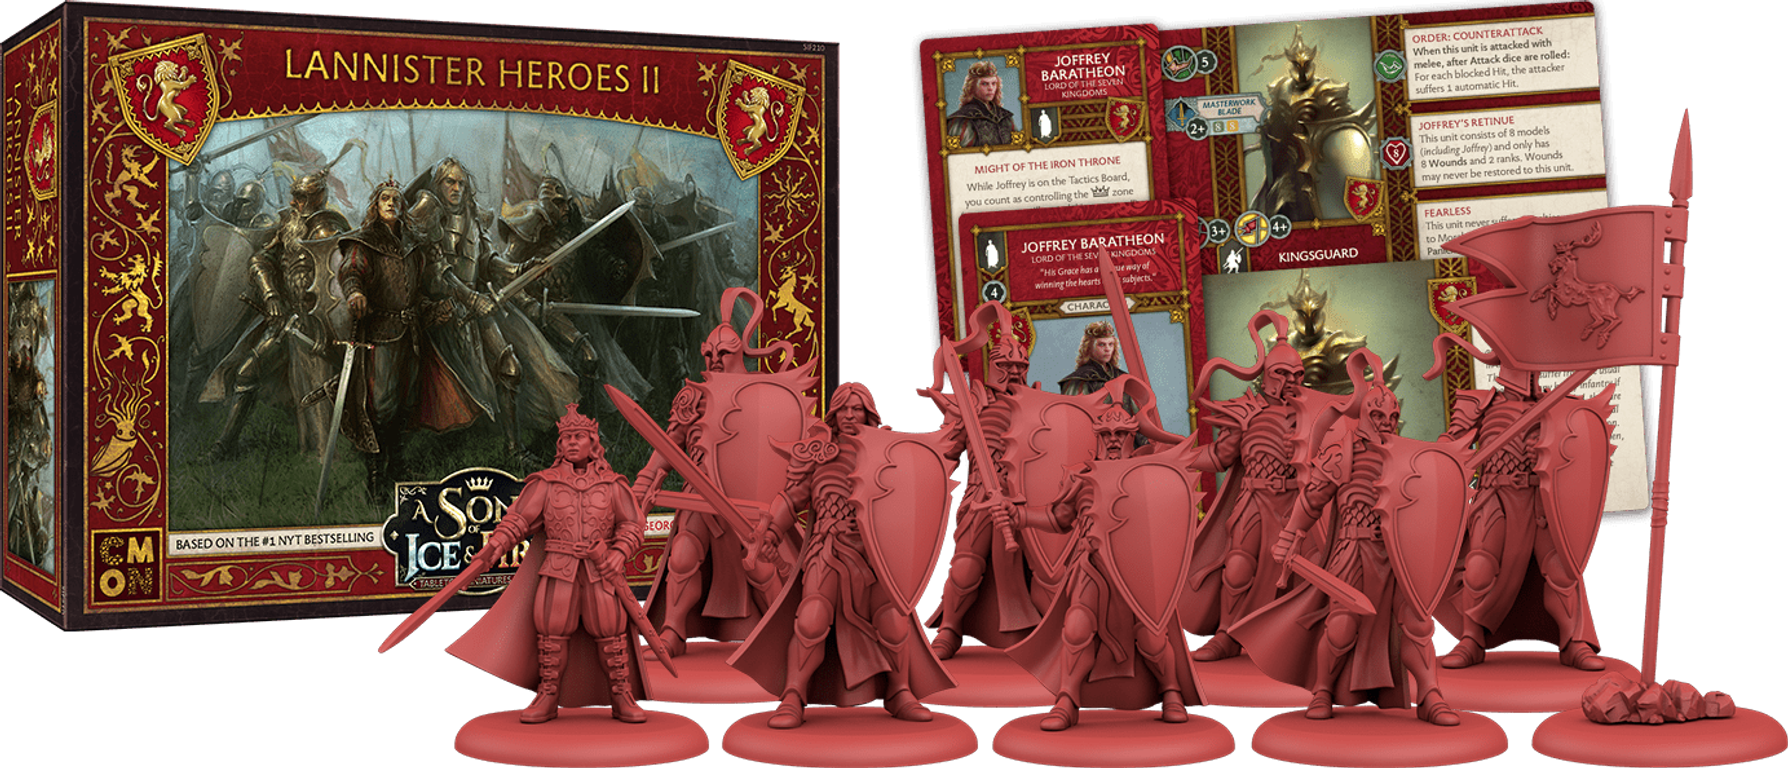 A Song of Ice & Fire: Tabletop Miniatures Game – Lannister Heroes II componenti